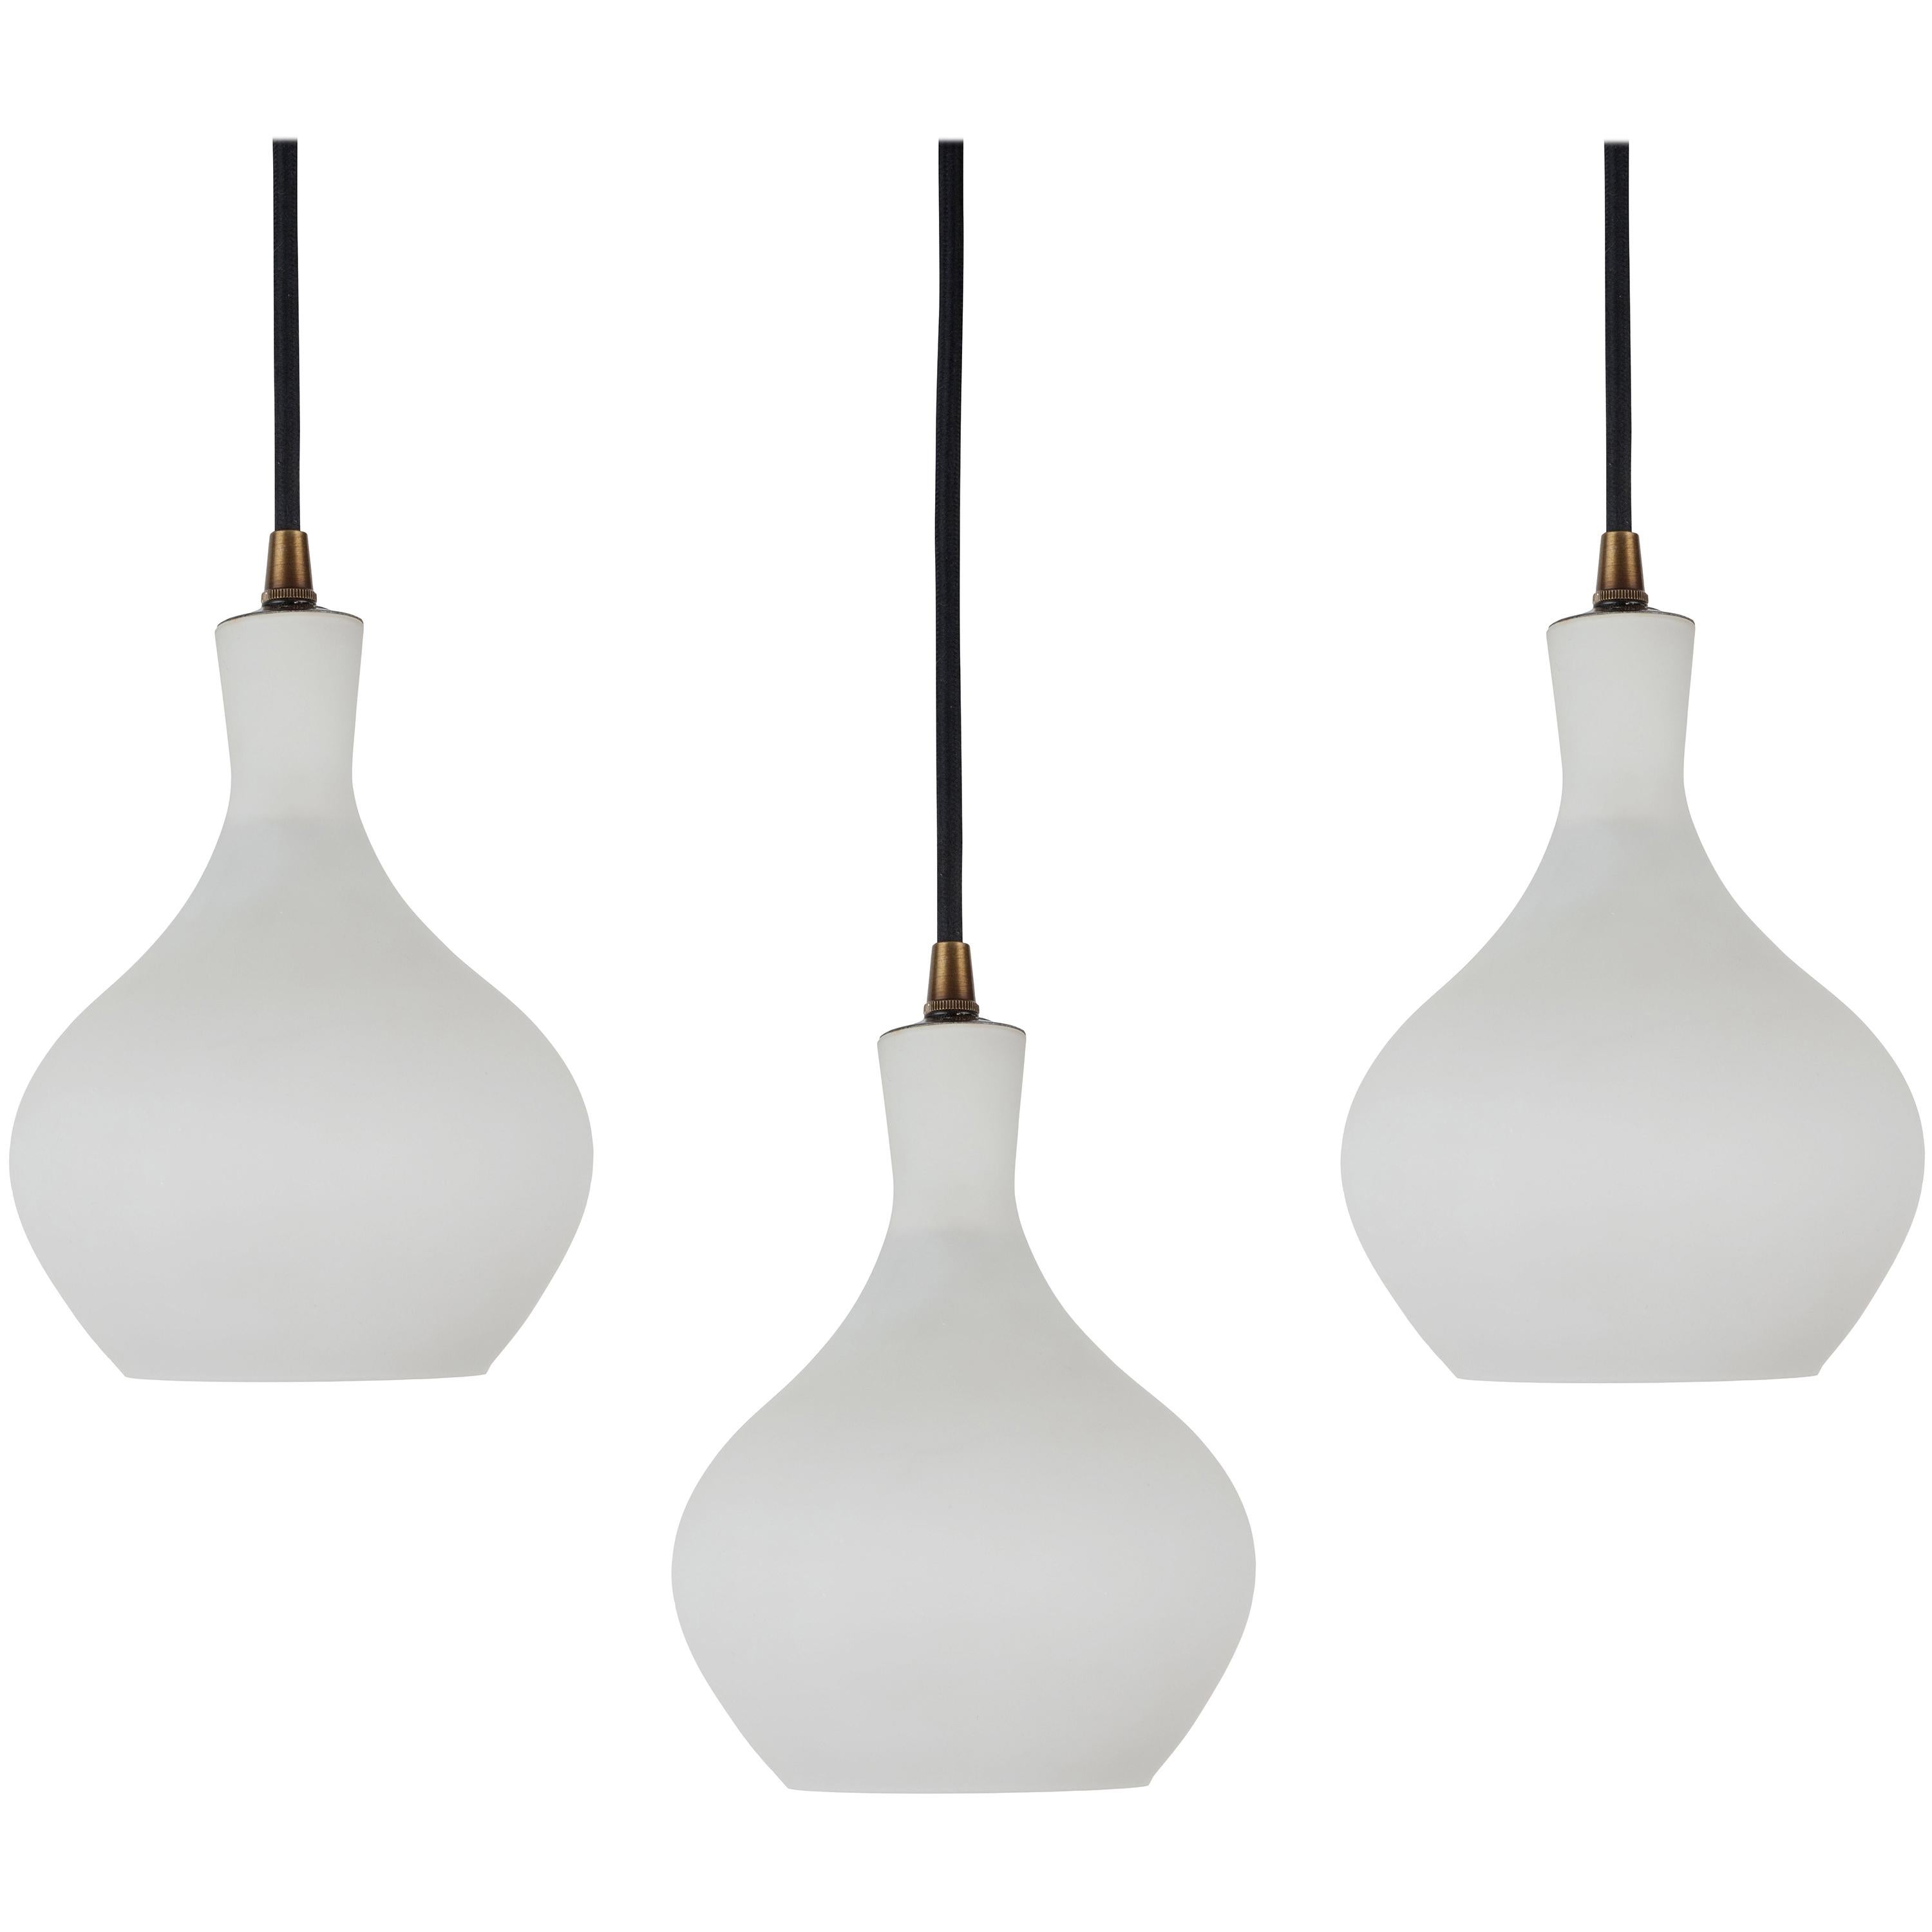 1950s, Italian glass pendants attributed to Stilnovo. Executed in opaline matte glass with patinated brass hardware detail and black painted metal. A sculptural and refined set of pendants characteristic of 1960s Italian design at its most elegant